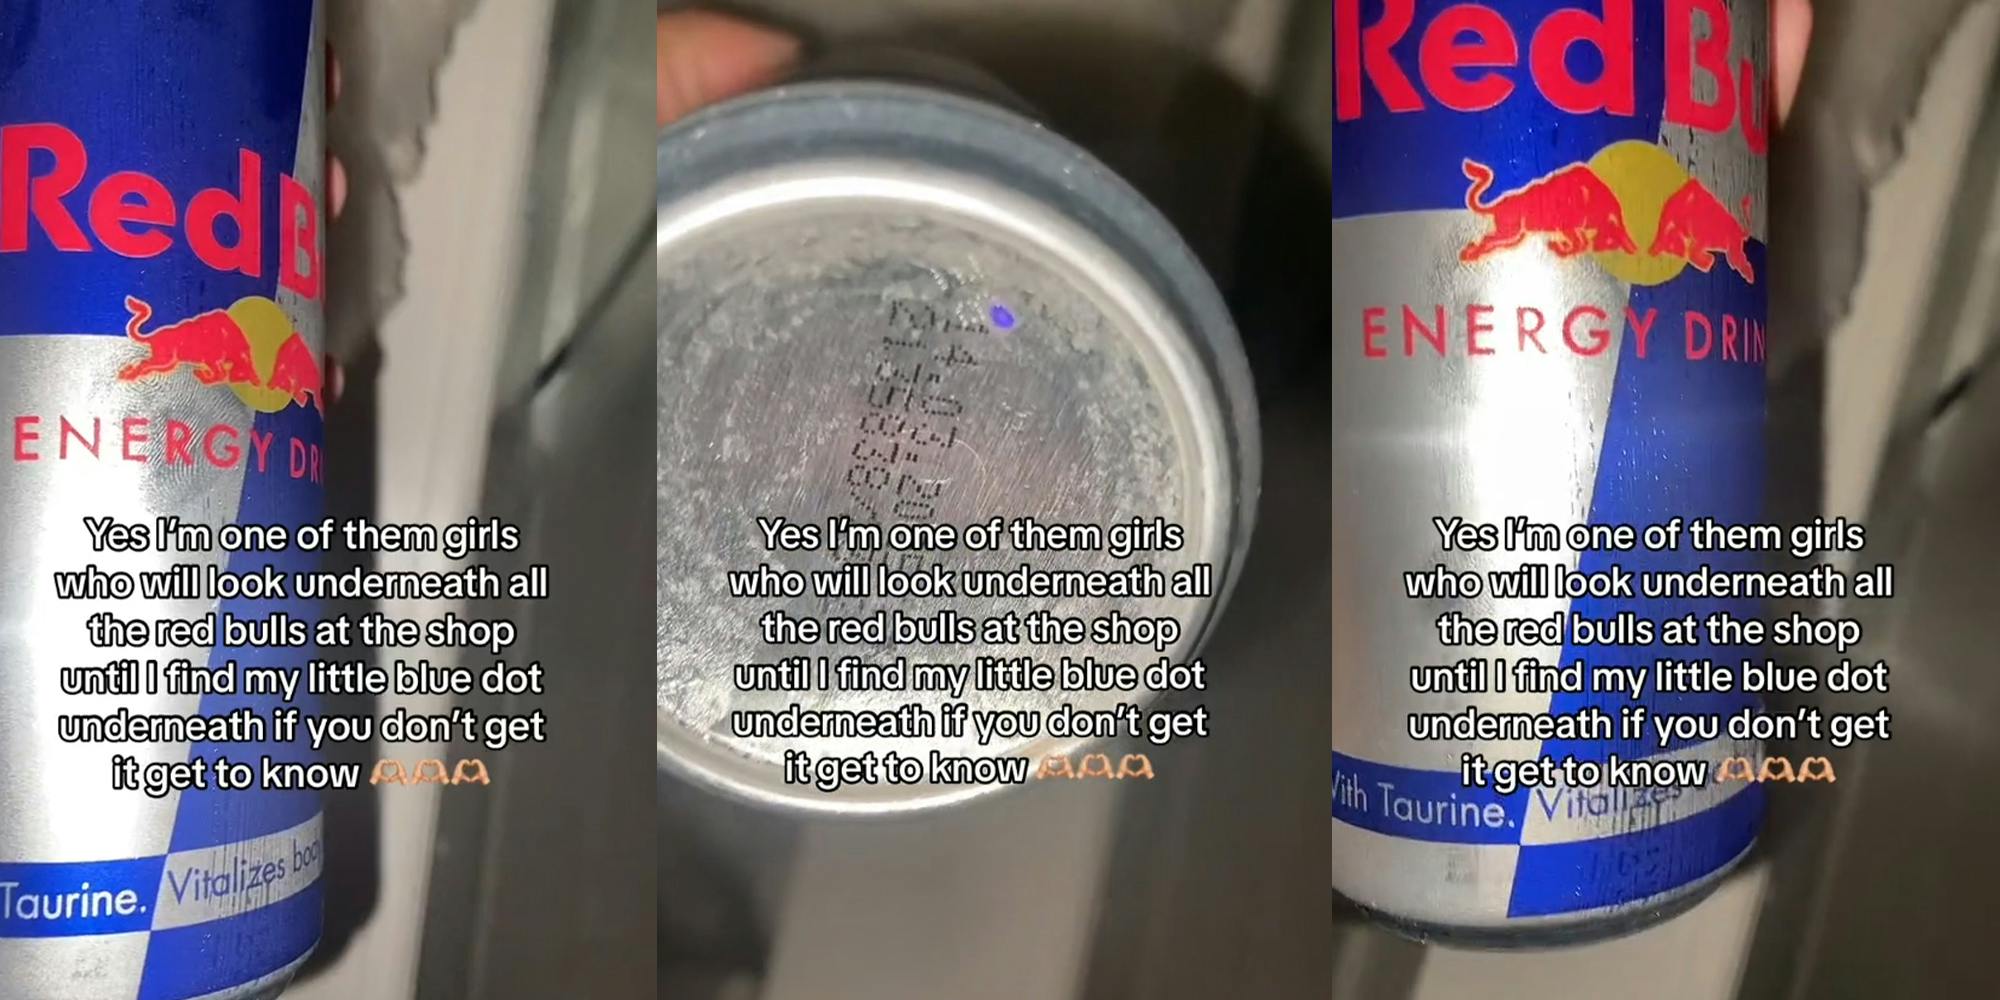 People are trying to find small blue dots under Red Bull cans at the 7/11